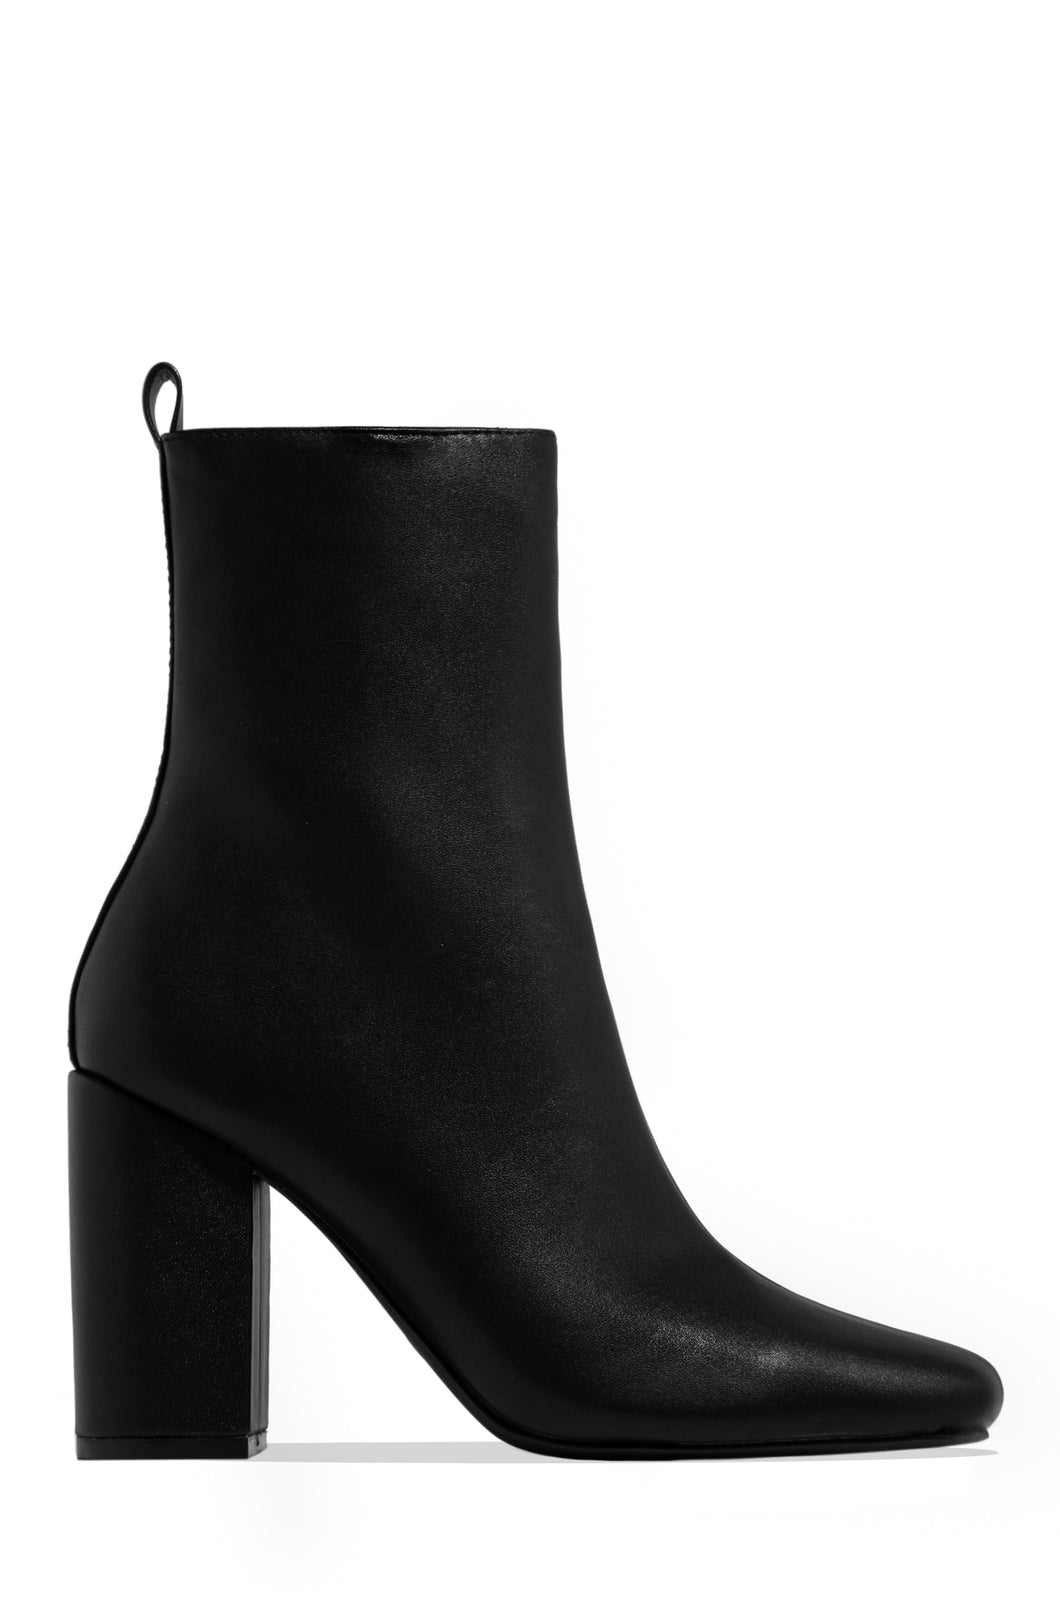 Full Moon Squared Toe Chunky Heel Ankle Booties - Black